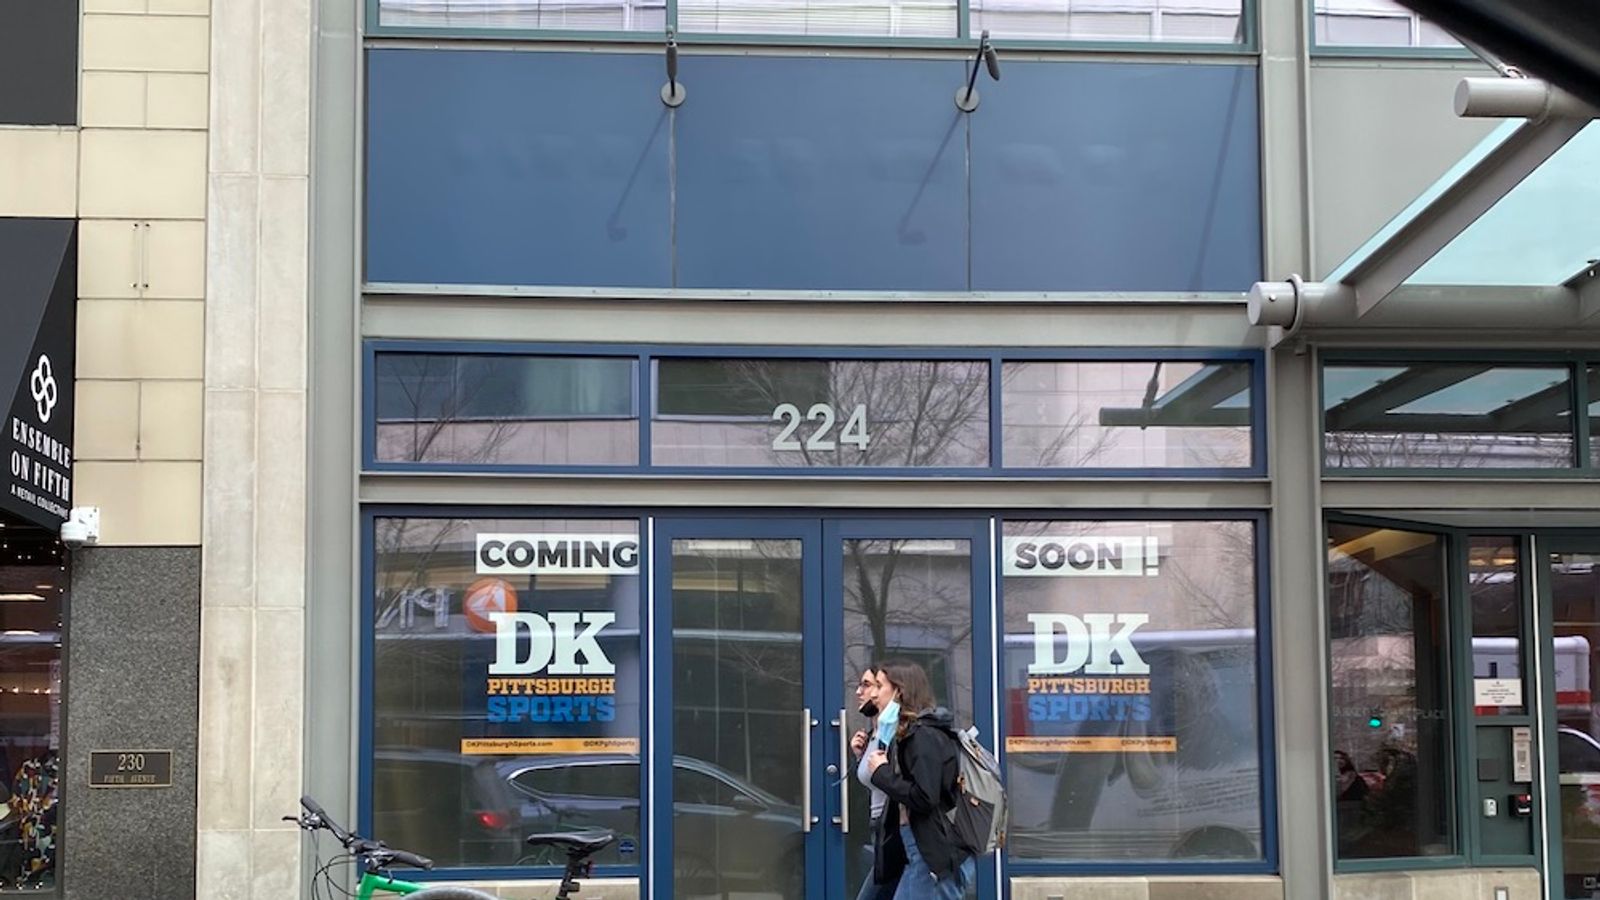 Come visit DK Pittsburgh Sports' new Downtown HQ/shop!